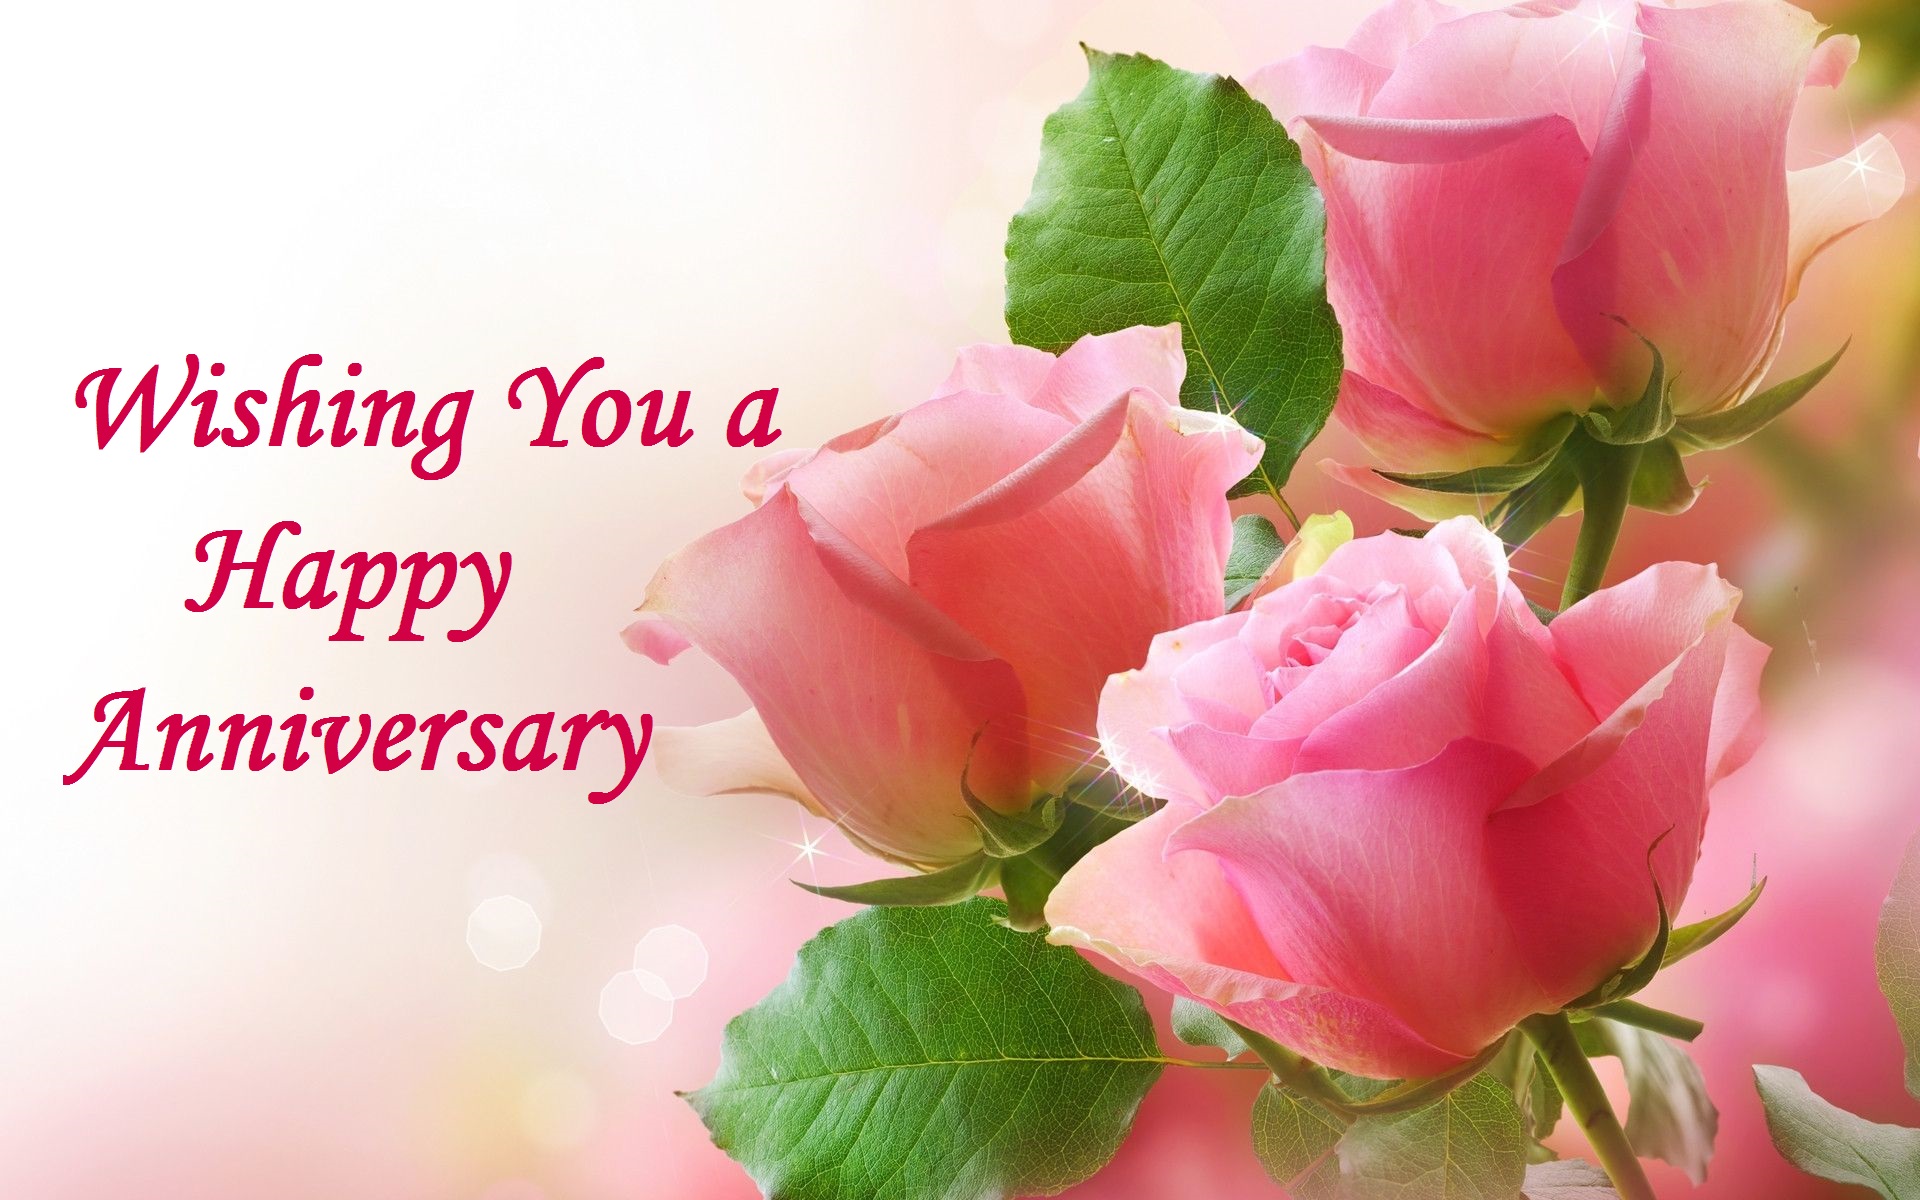 beautiful flower image with anniversary message